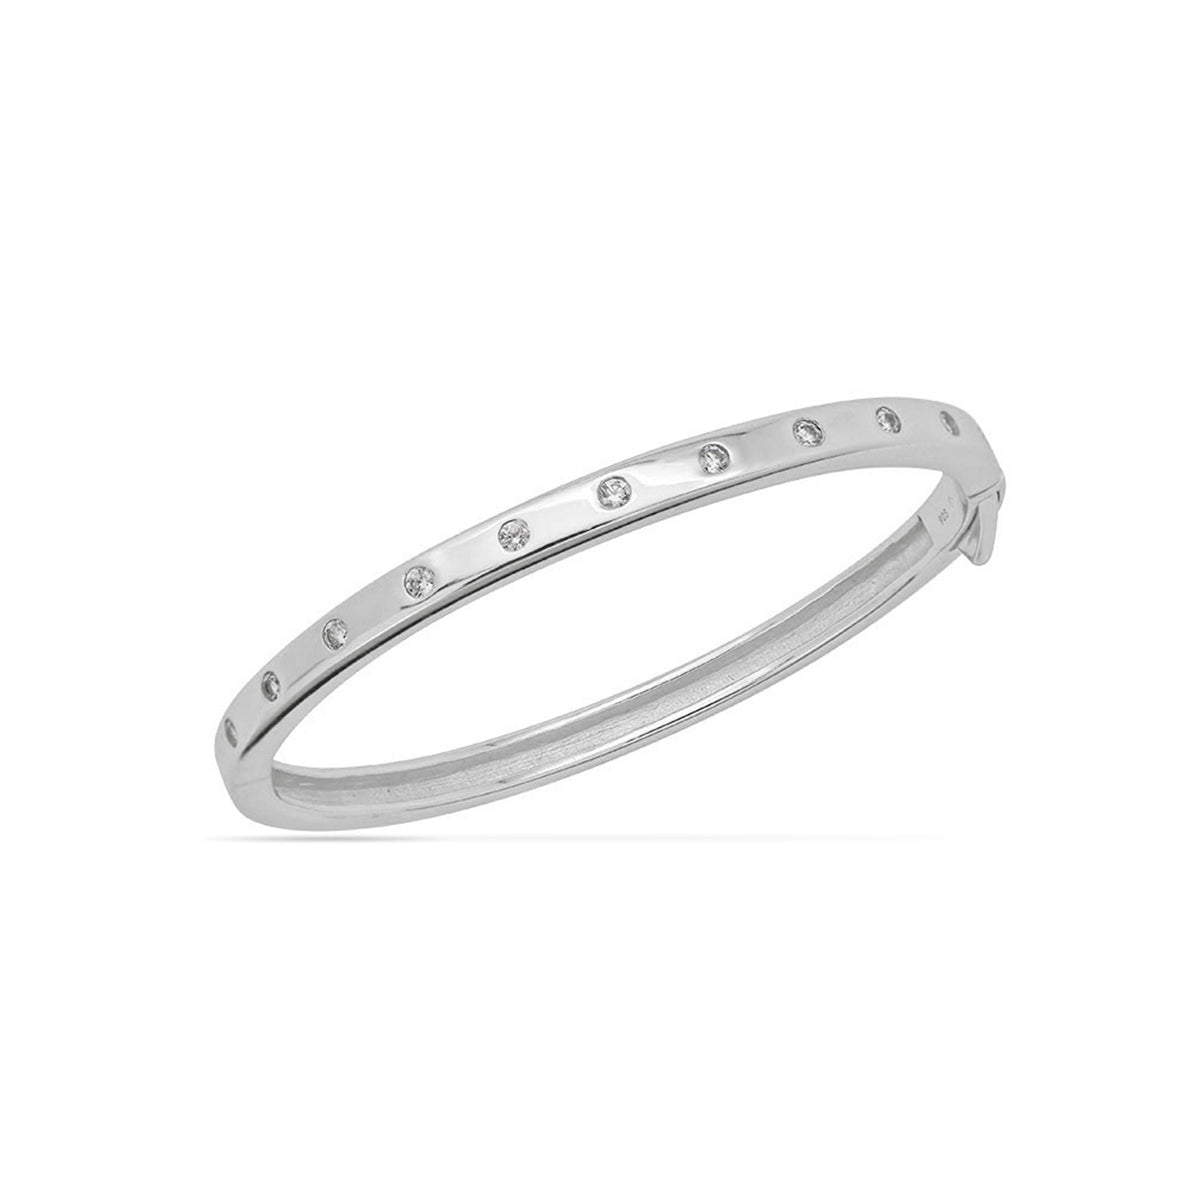 Hinge Cuff Bracelet Silver Plated